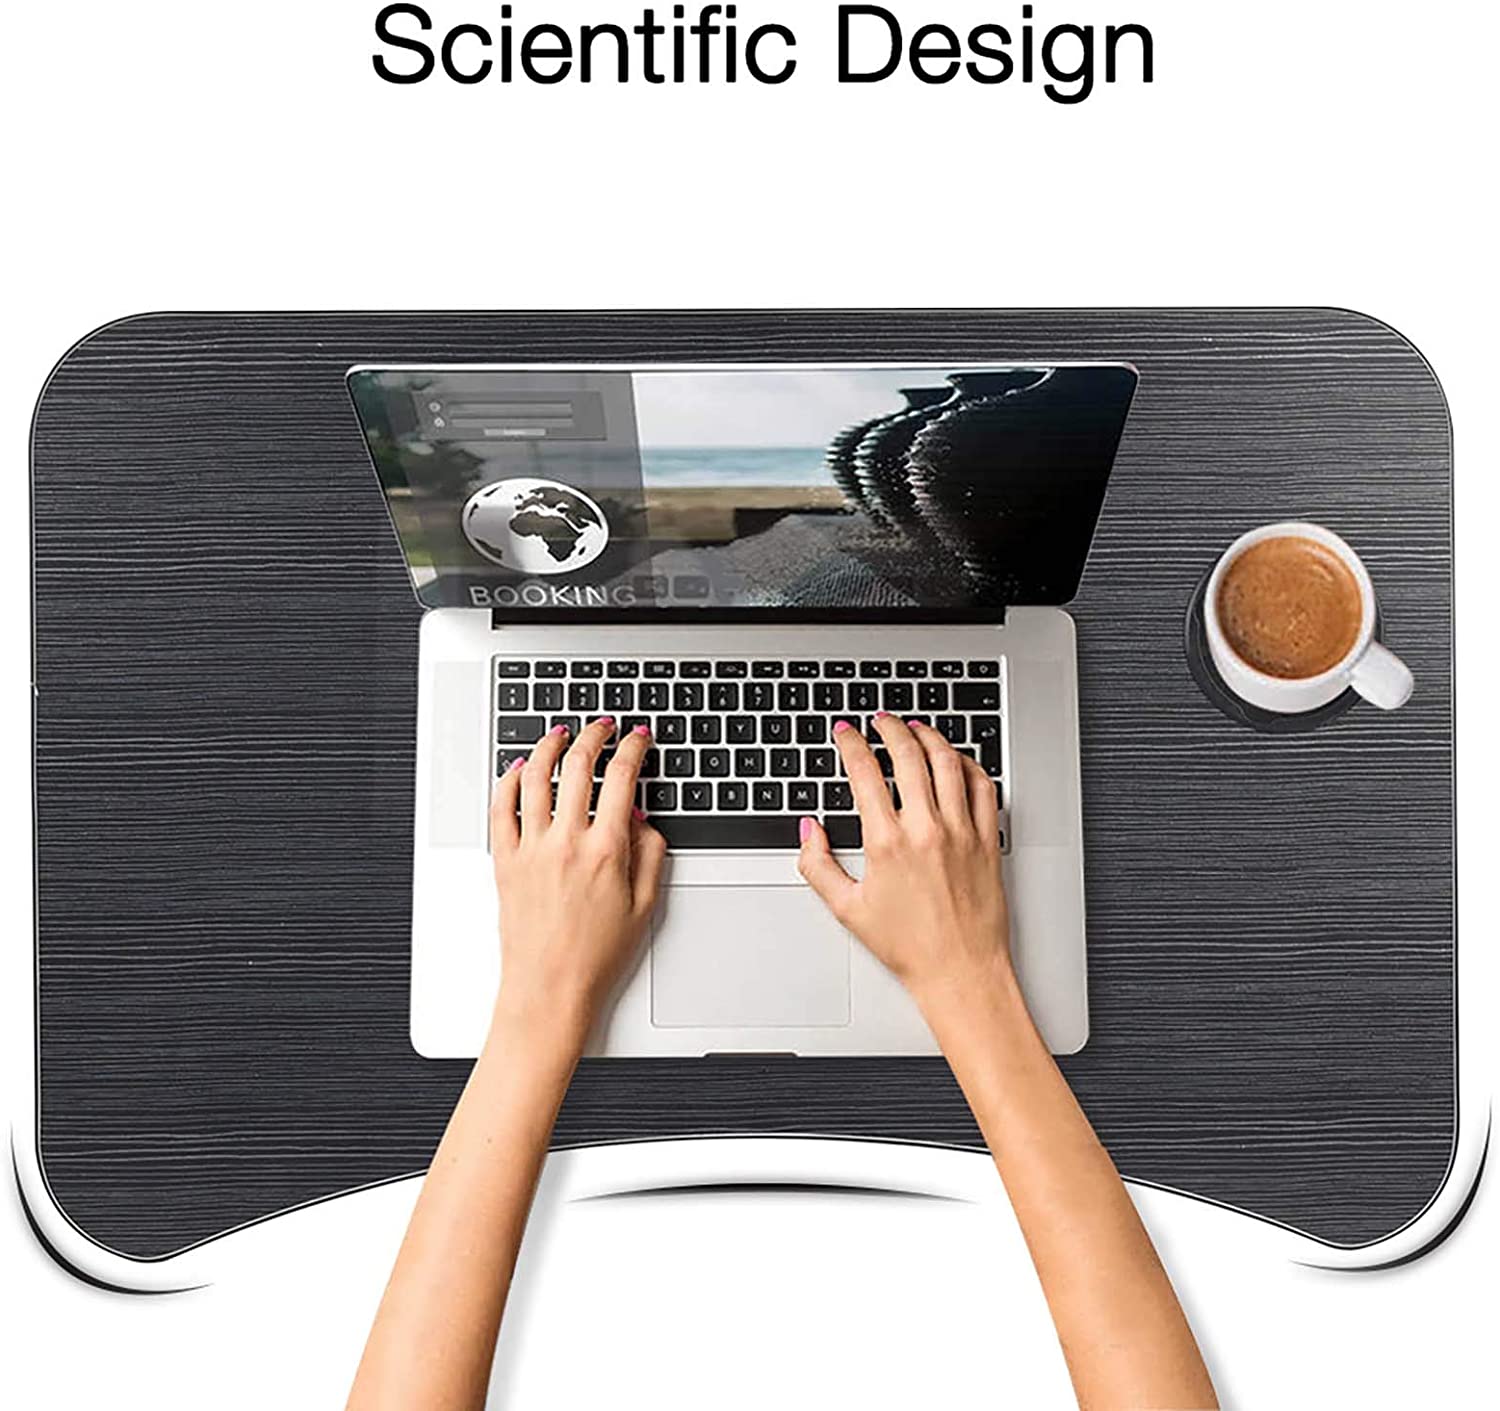 Multifunctional-Folding-Wooden-Lazy-Bed-Desk-Macbook-Table-with-Pen-Cup-Slot-Storage-Drawer-1874952-4